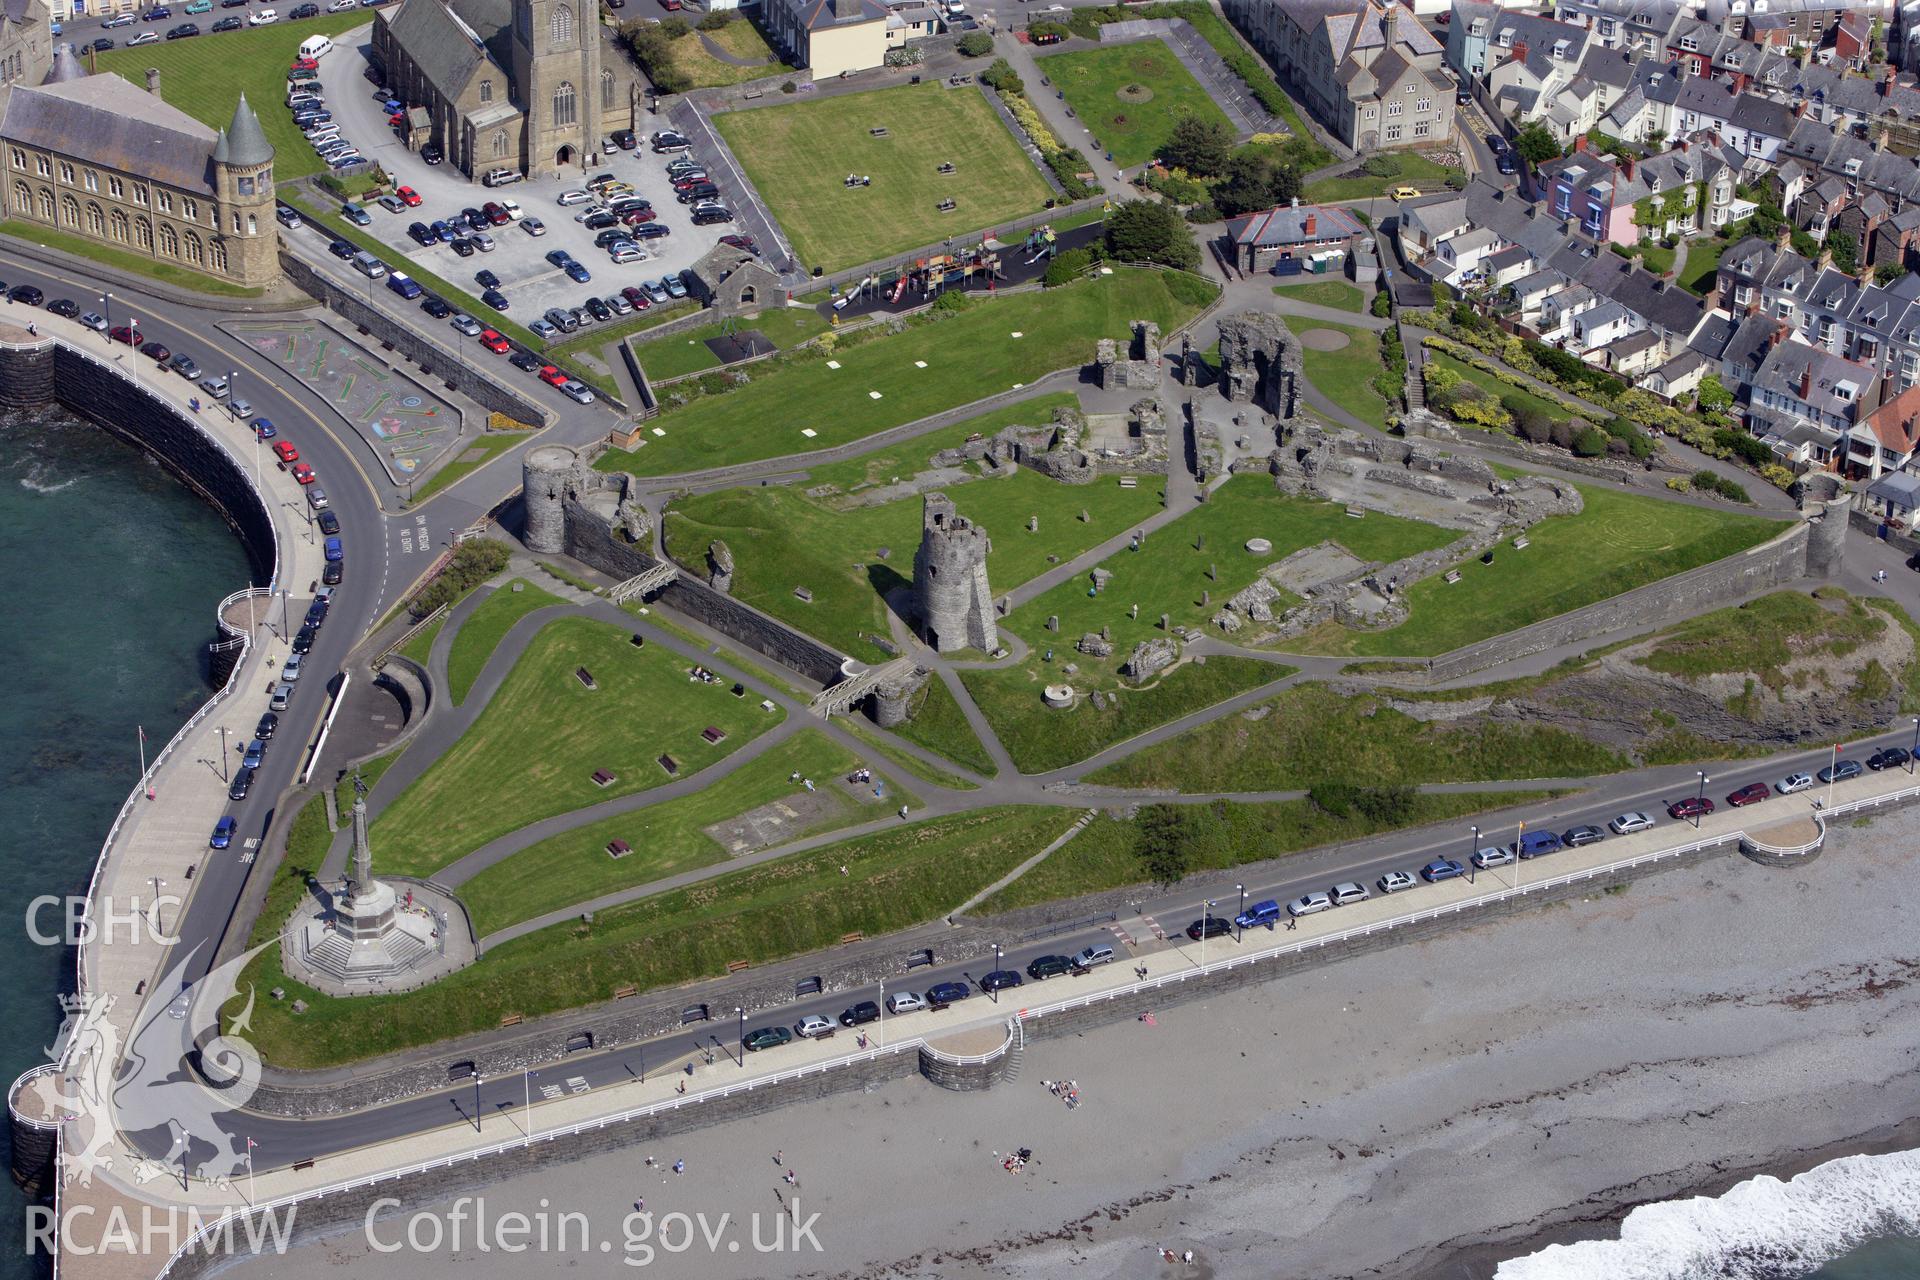 RCAHMW colour oblique aerial photograph of Aberystwyth Castle. Taken on 16 June 2009 by Toby Driver